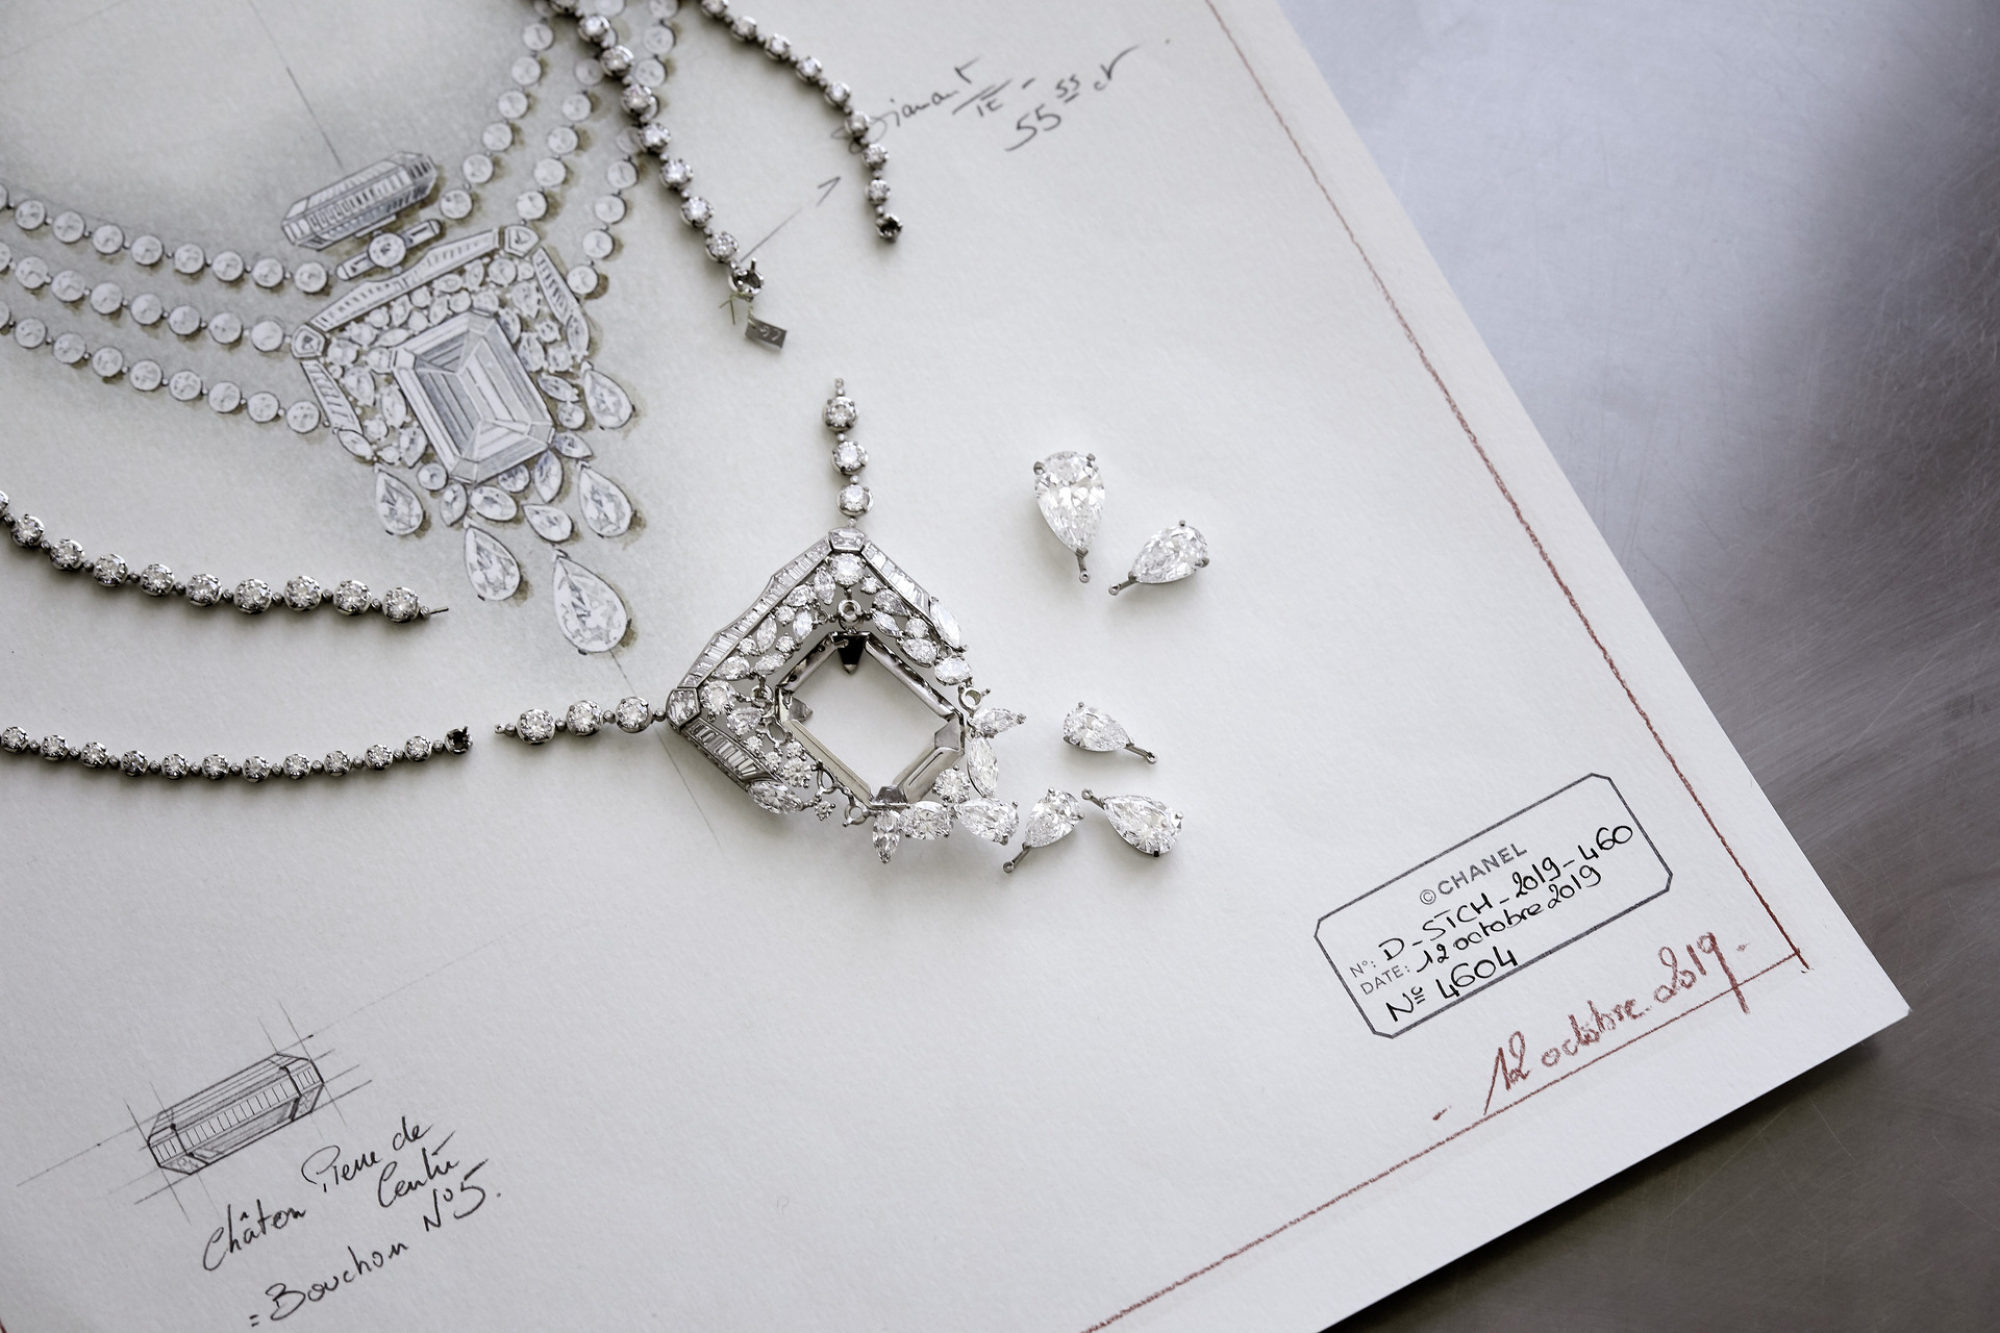 Chanel N°5 diamond necklace is an ode to the legendary perfume